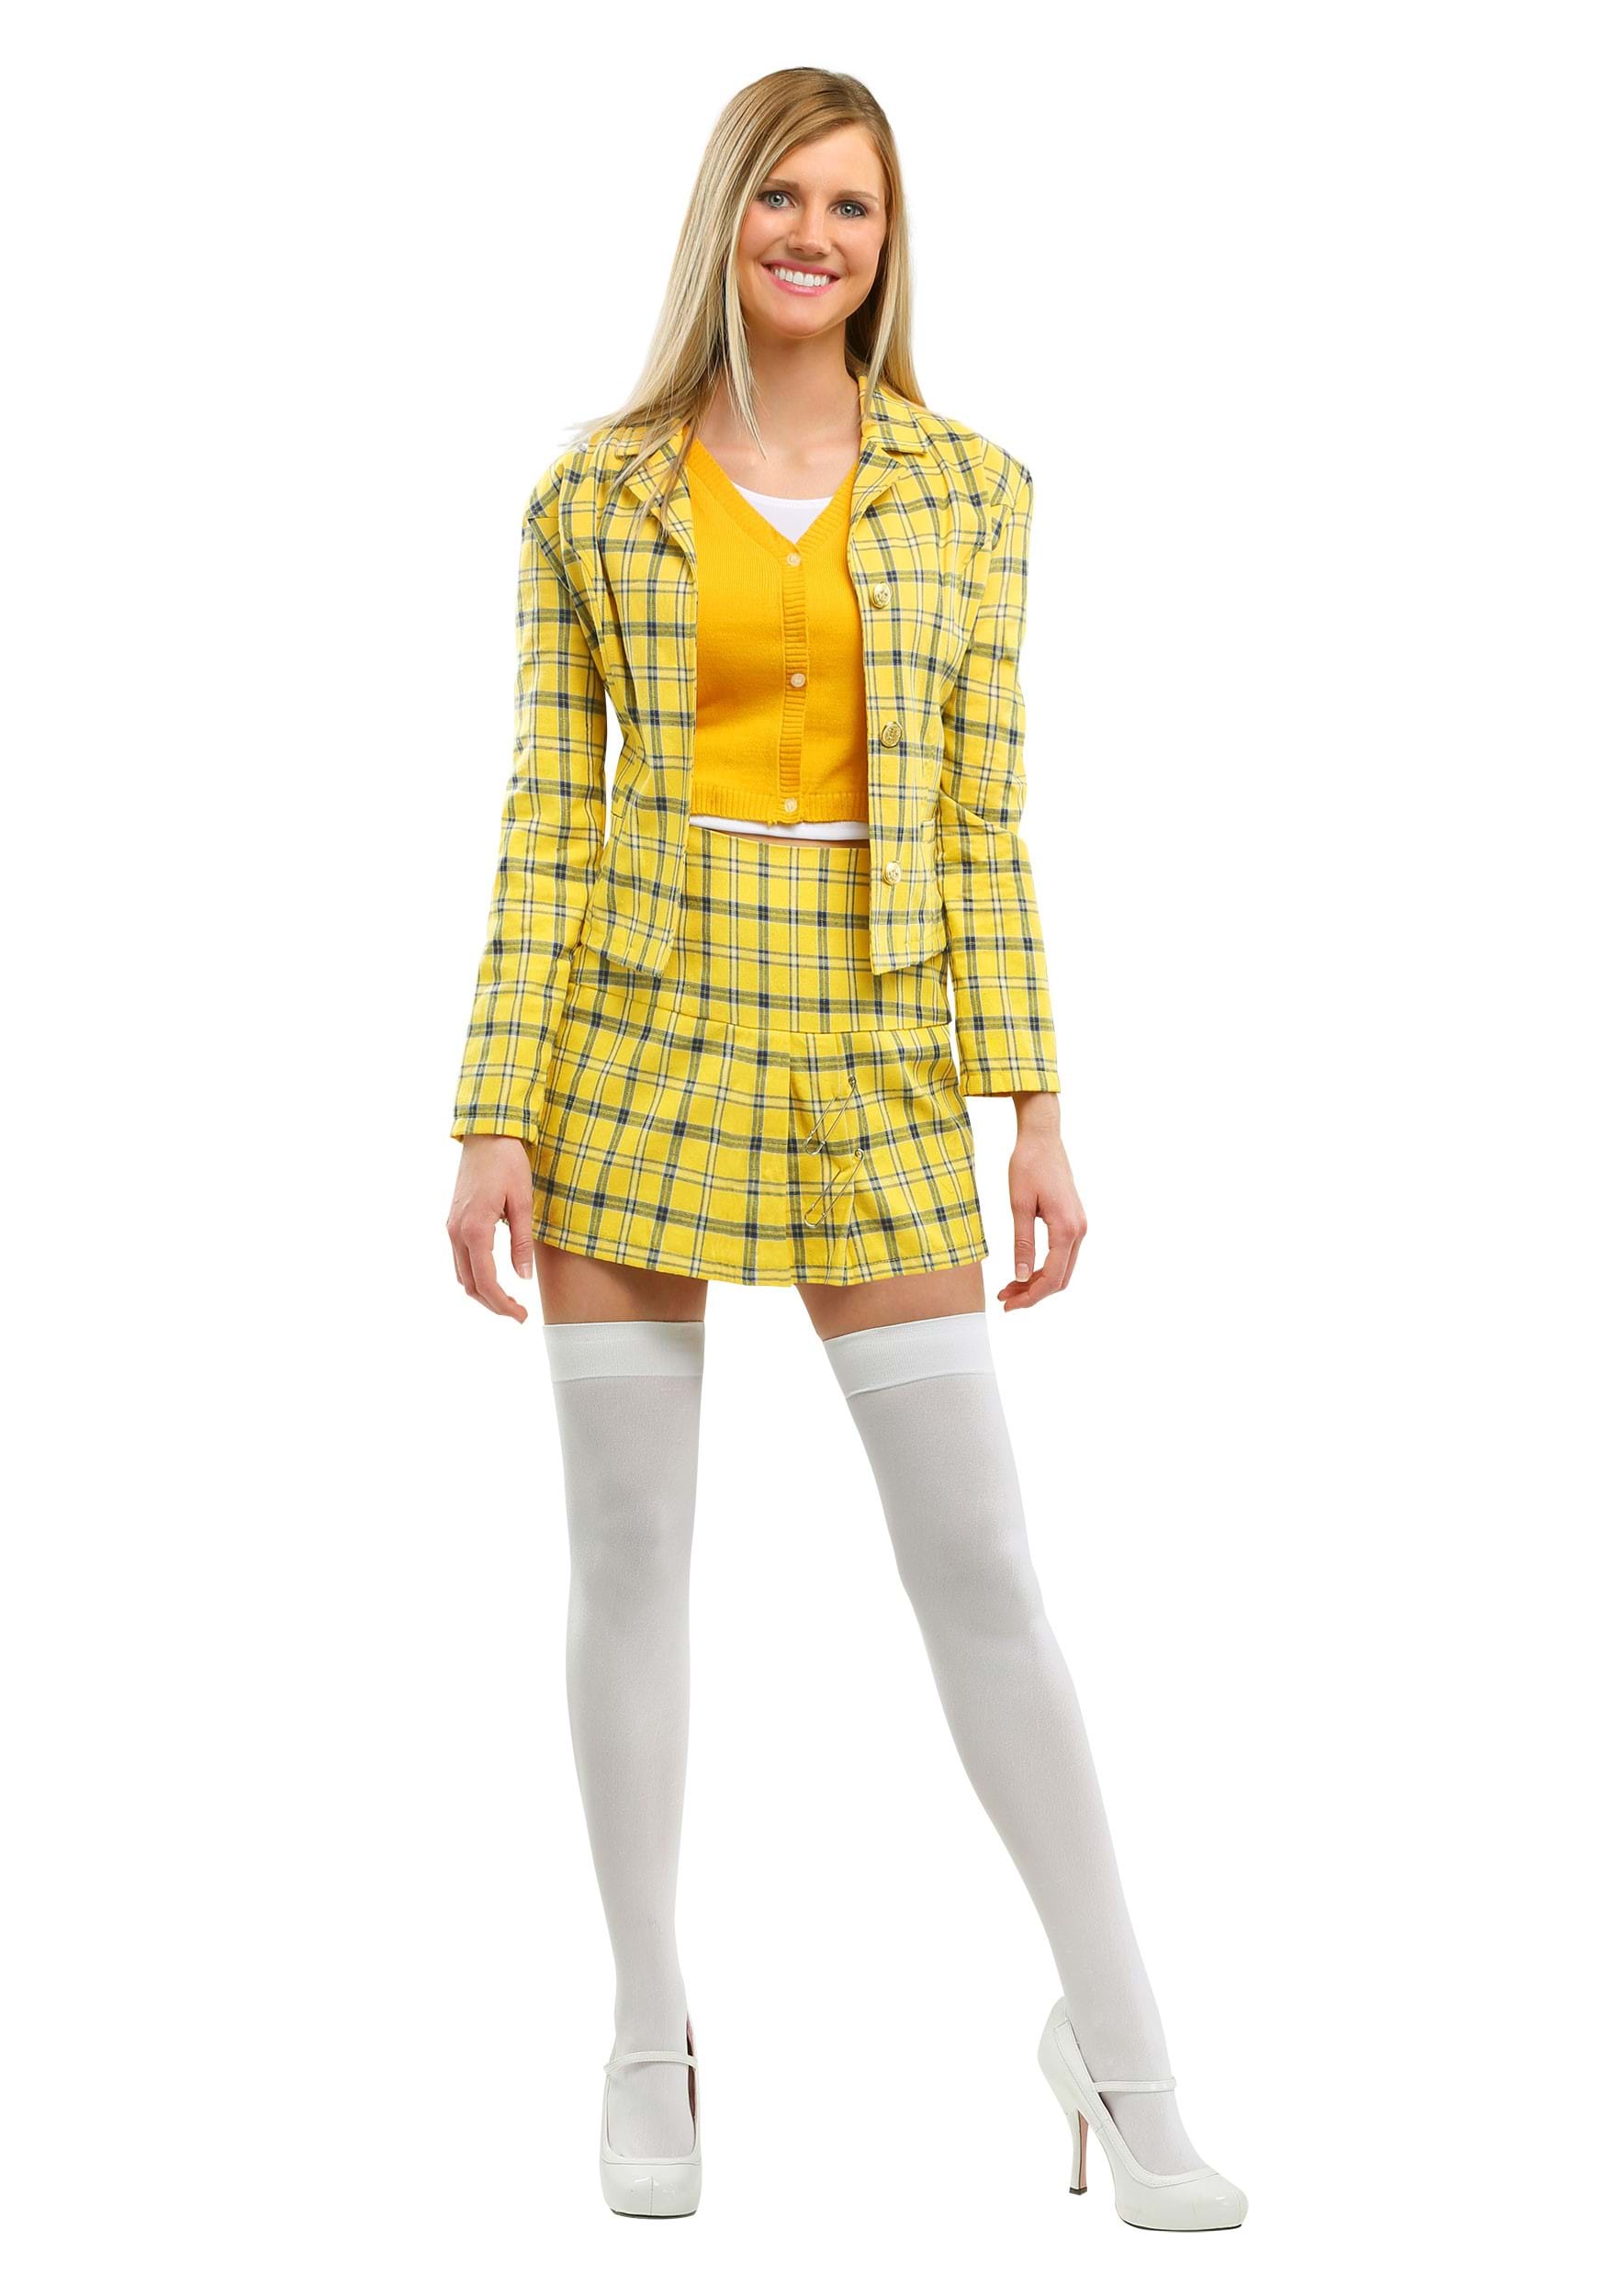 Image of Clueless Cher Costume for Women | Exclusive | Made By Us ID FUN2948AD-L